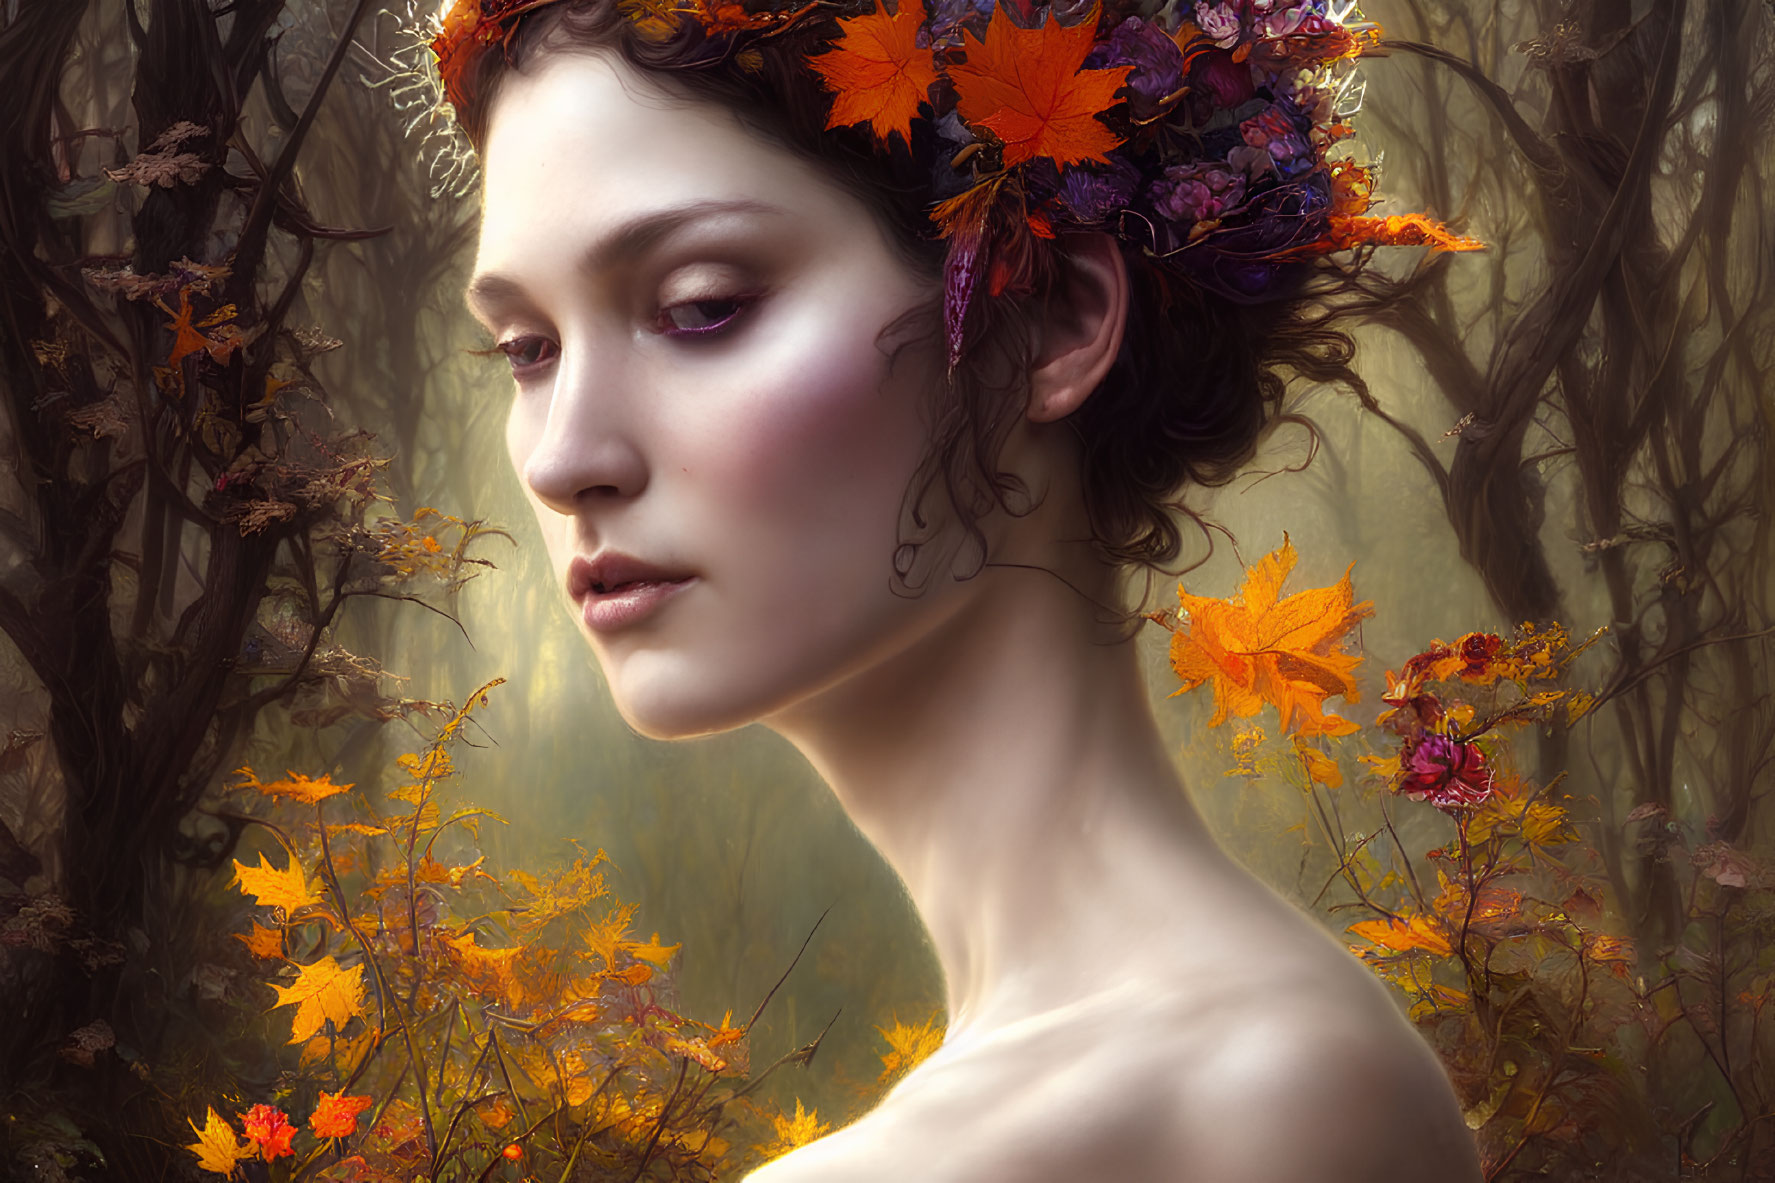 Woman with autumn leaf wreath in mystical forest setting